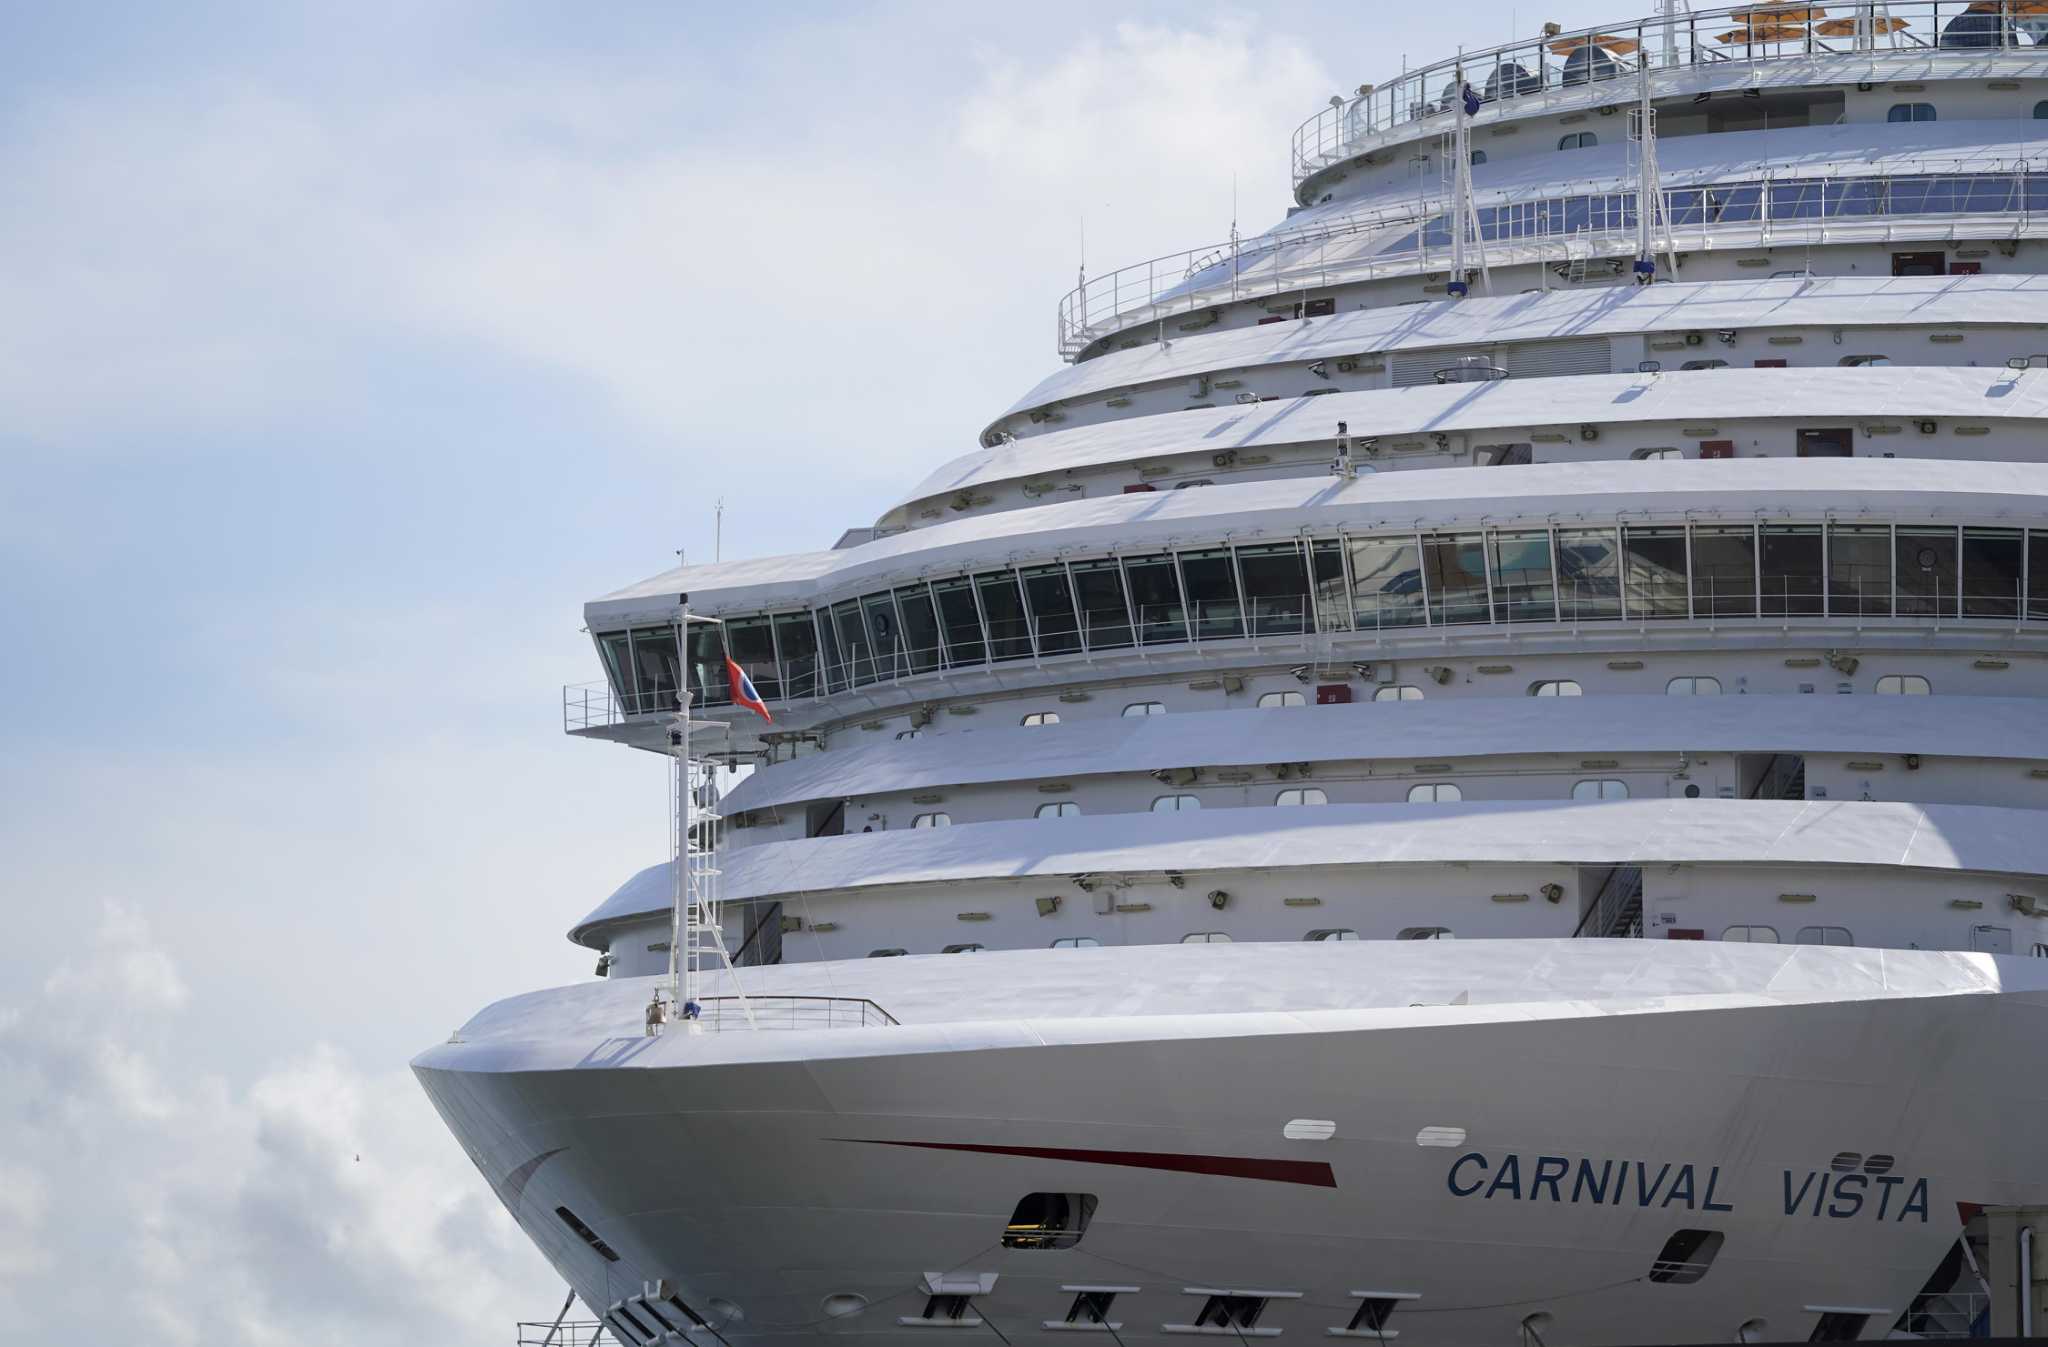 How Carnival Vista Cruise Is Different Compared to Before the Pandemic